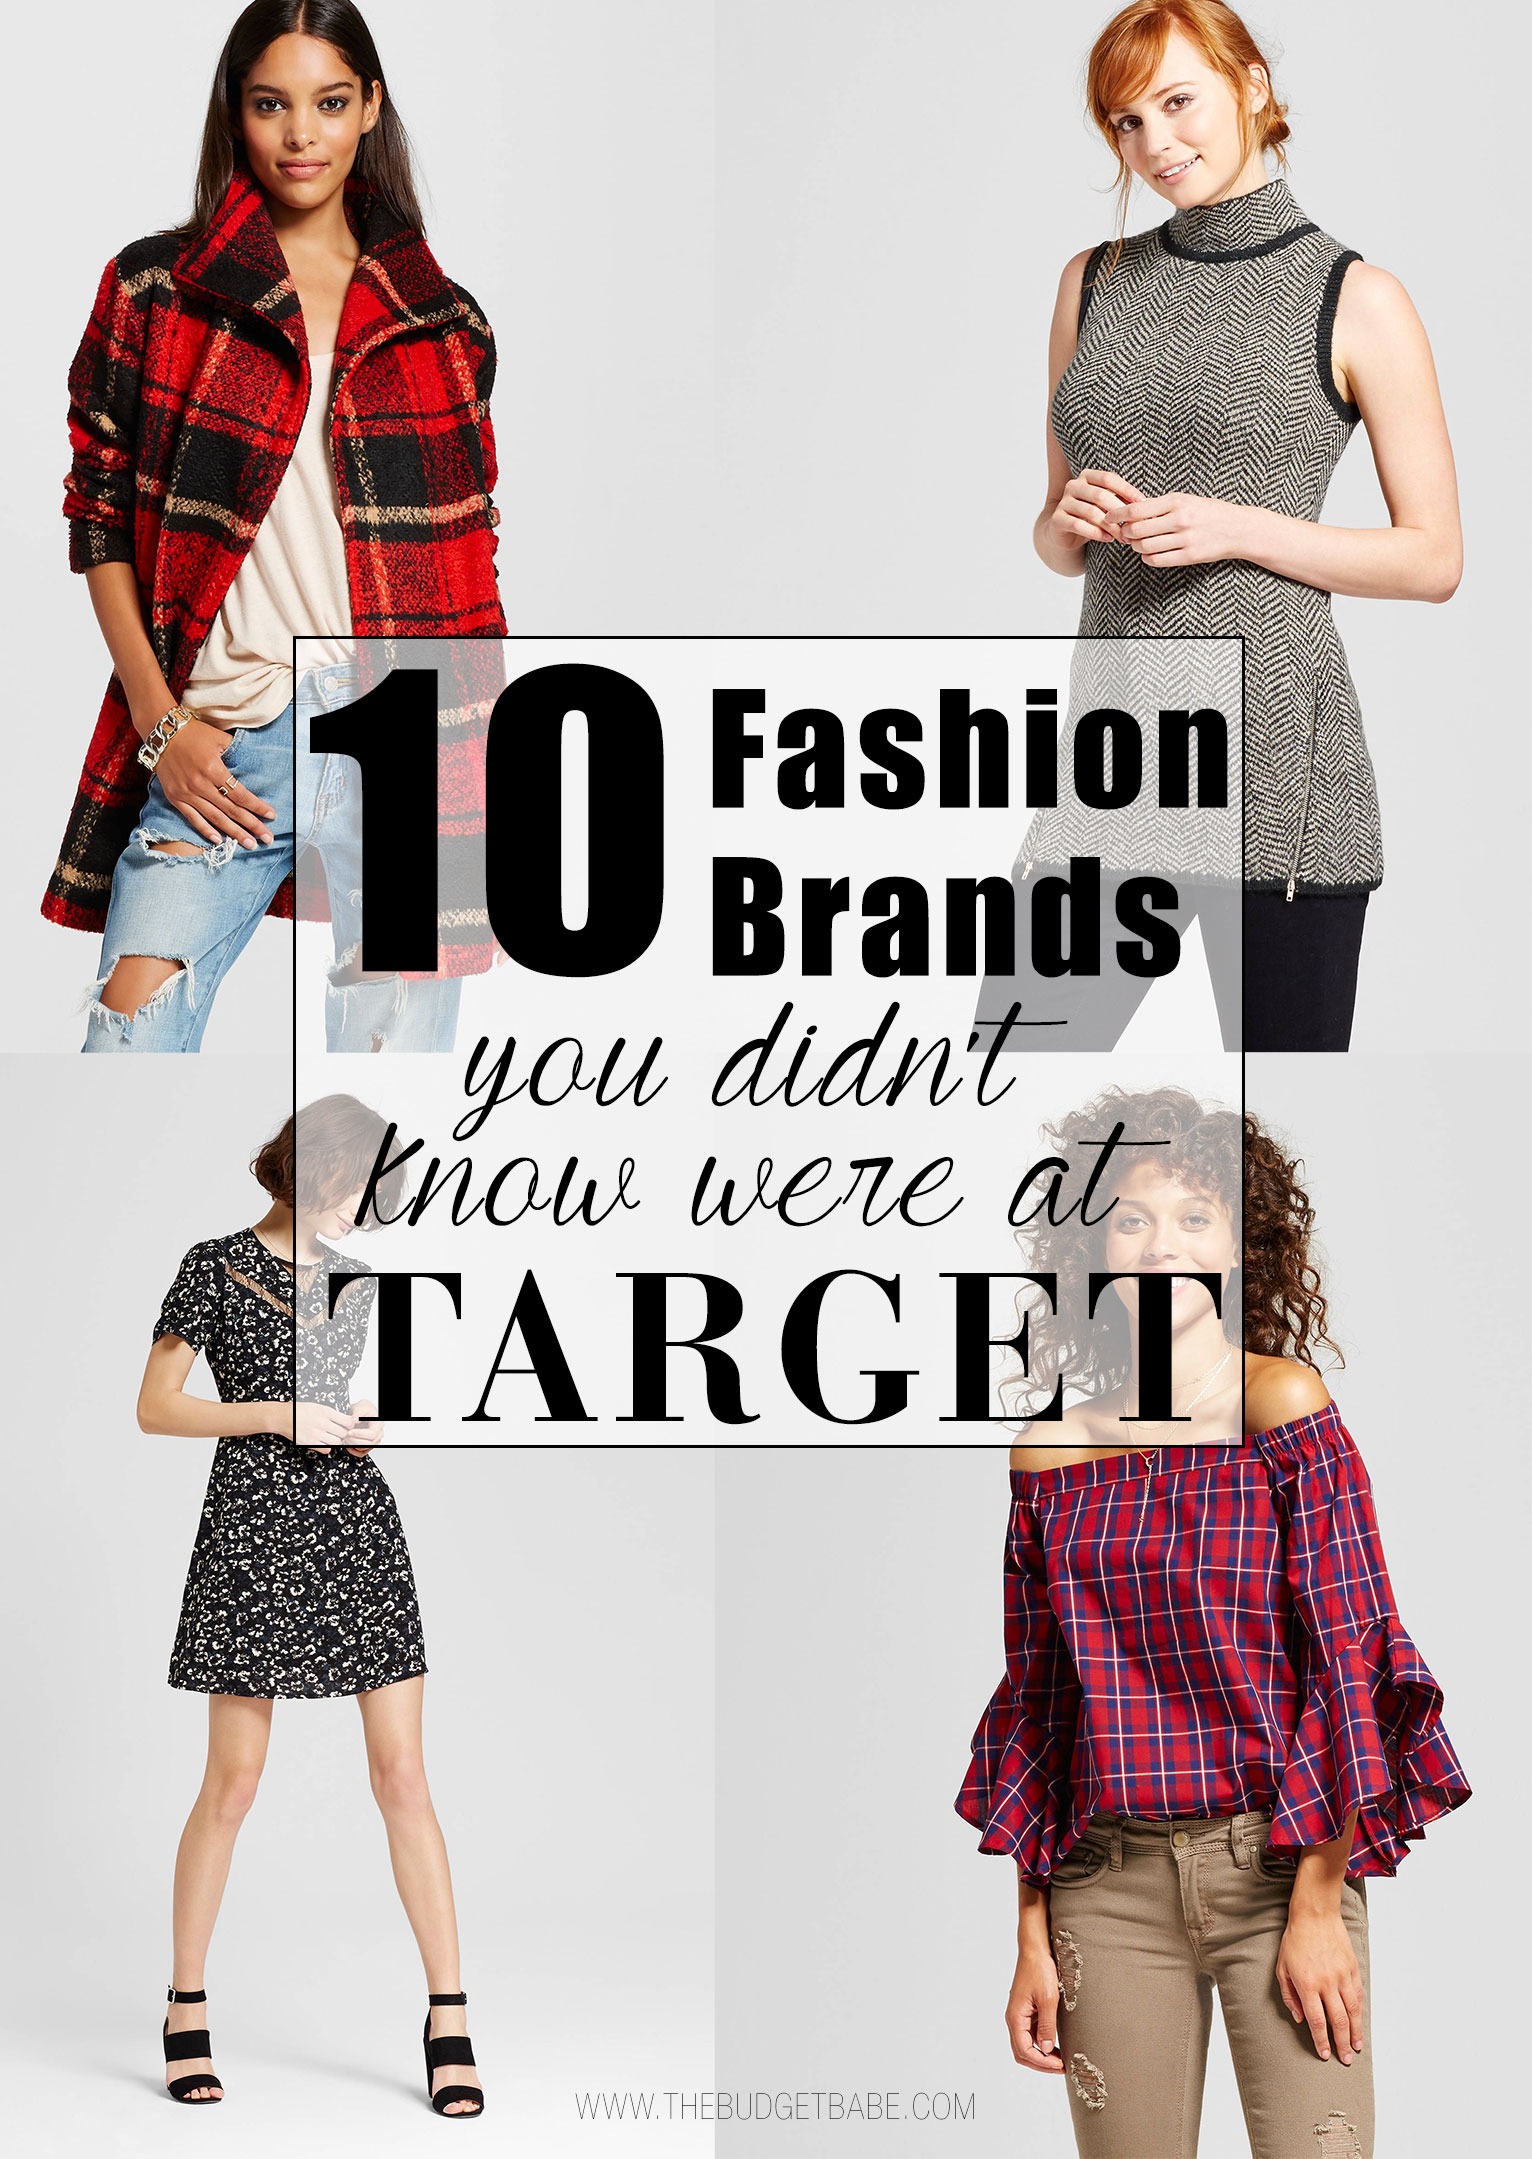 Here are 10 fashion brands you might not know at Target.